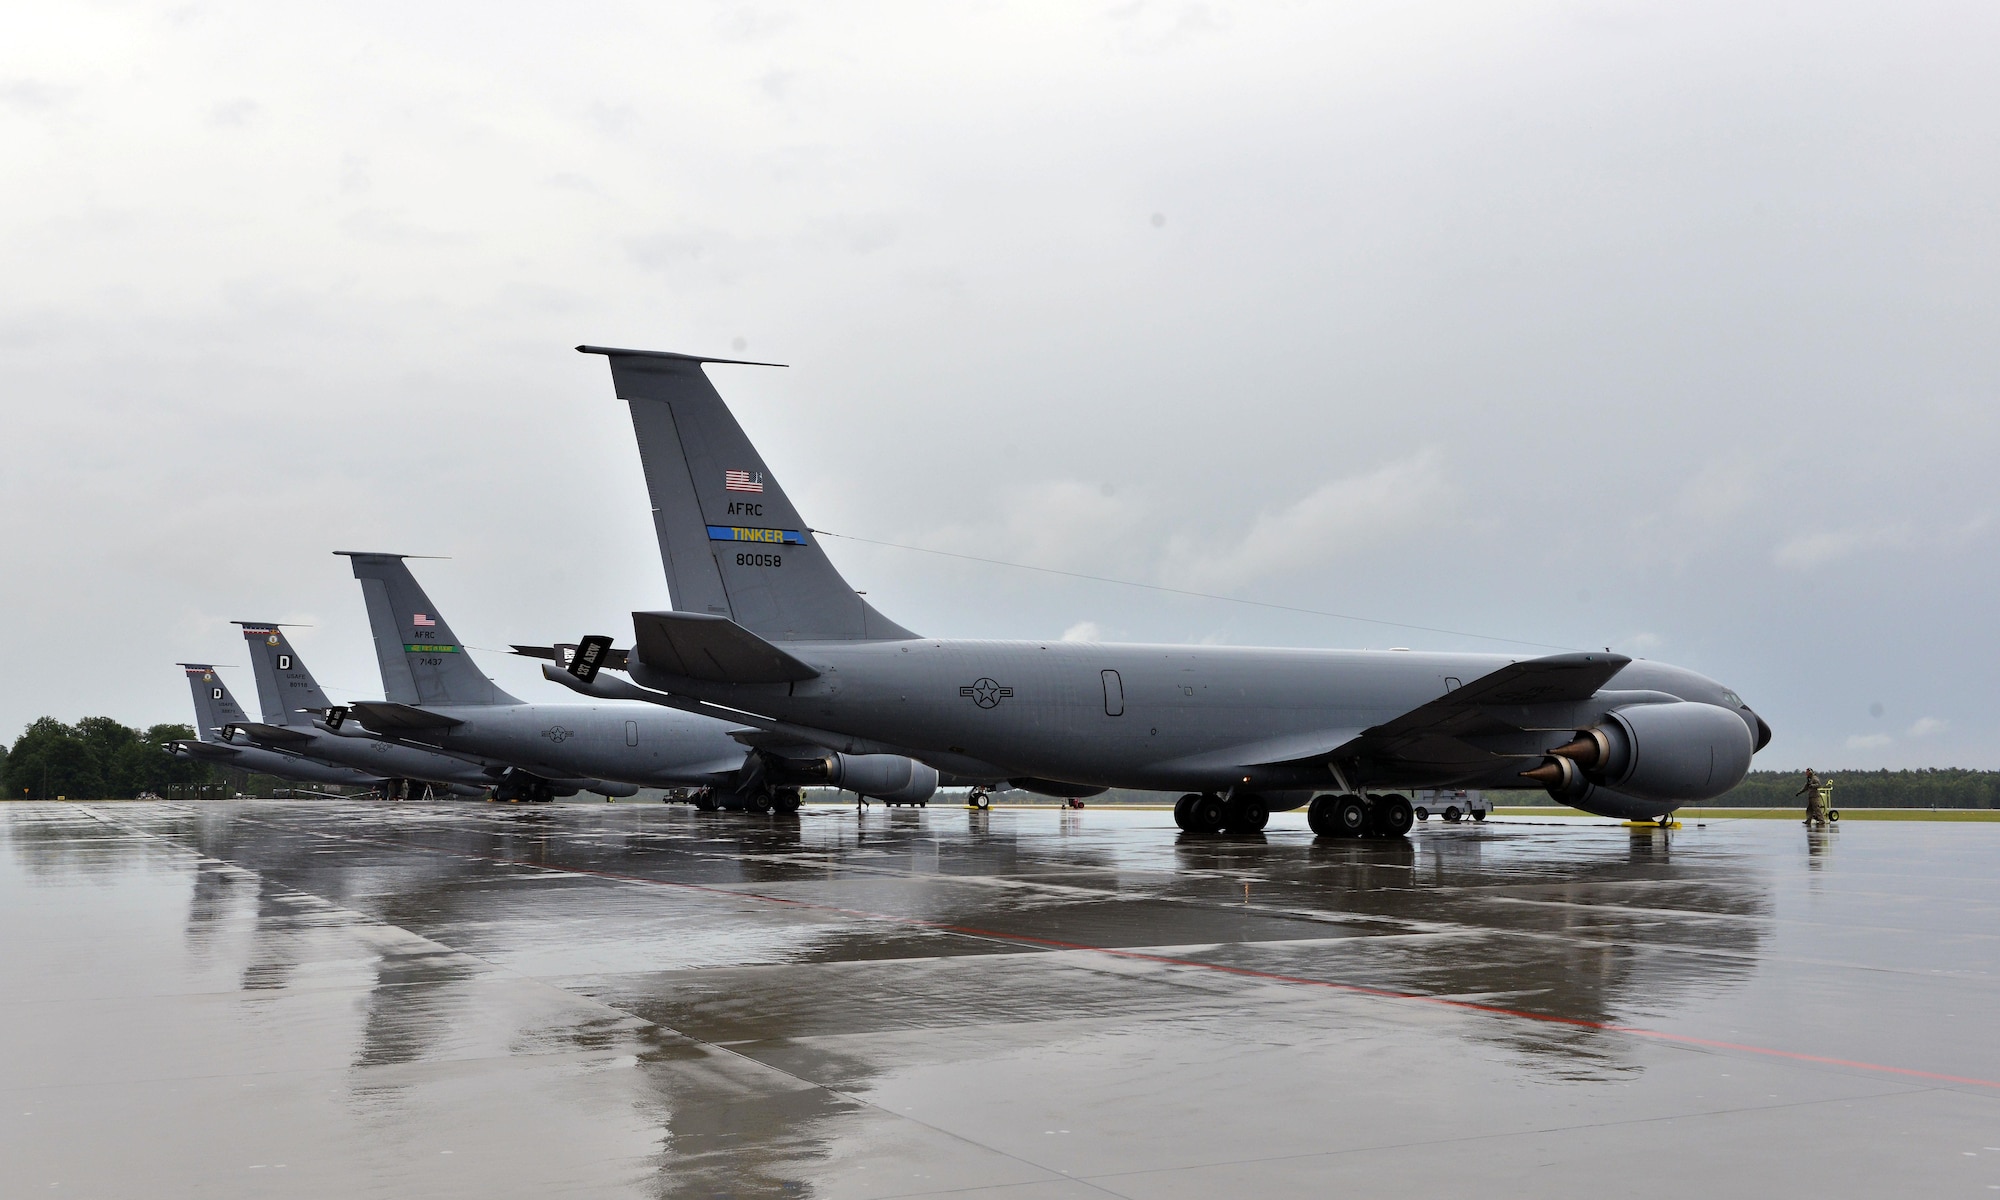 Four KC-135 Stratotankers await a mission on the flightline in support of Baltic Operations 2015, June 9, 2015, at Powidz Air Base, Poland. Baltops, held June 5-20, is a multinational maritime exercise held in parts of Poland, Sweden, Germany, and throughout the Baltic Sea, and includes participation from 14 NATO and three partner nations. (U.S. Air Force photo/Senior Airman Michael Battles)